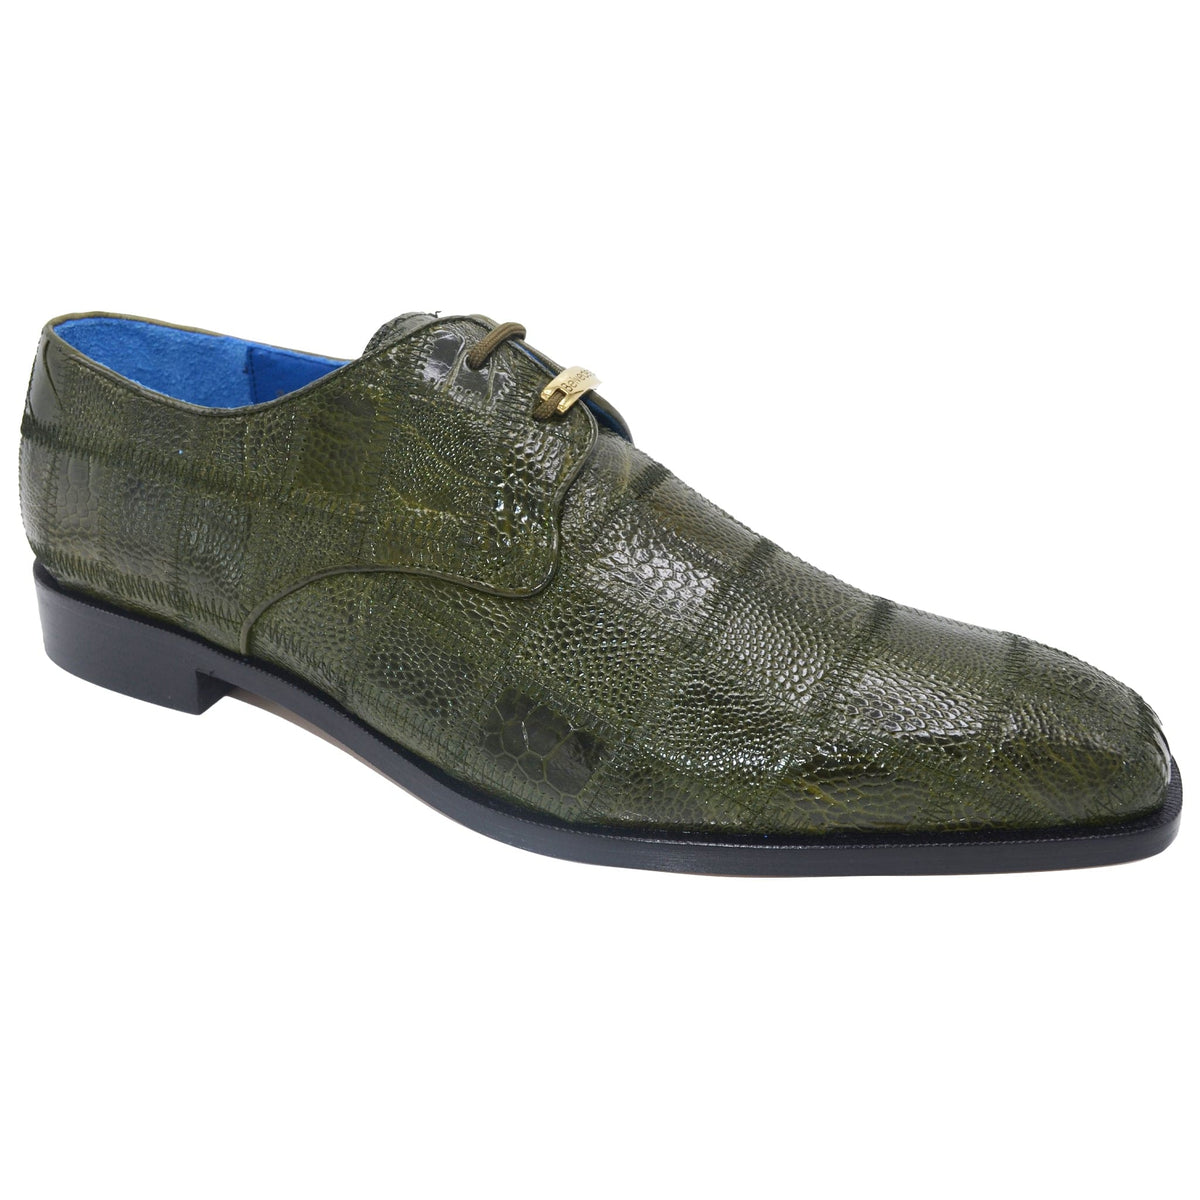 BELVEDERE F T OLIVE / 9.0 SABATO LACE UP BY BELVEDERE/R16